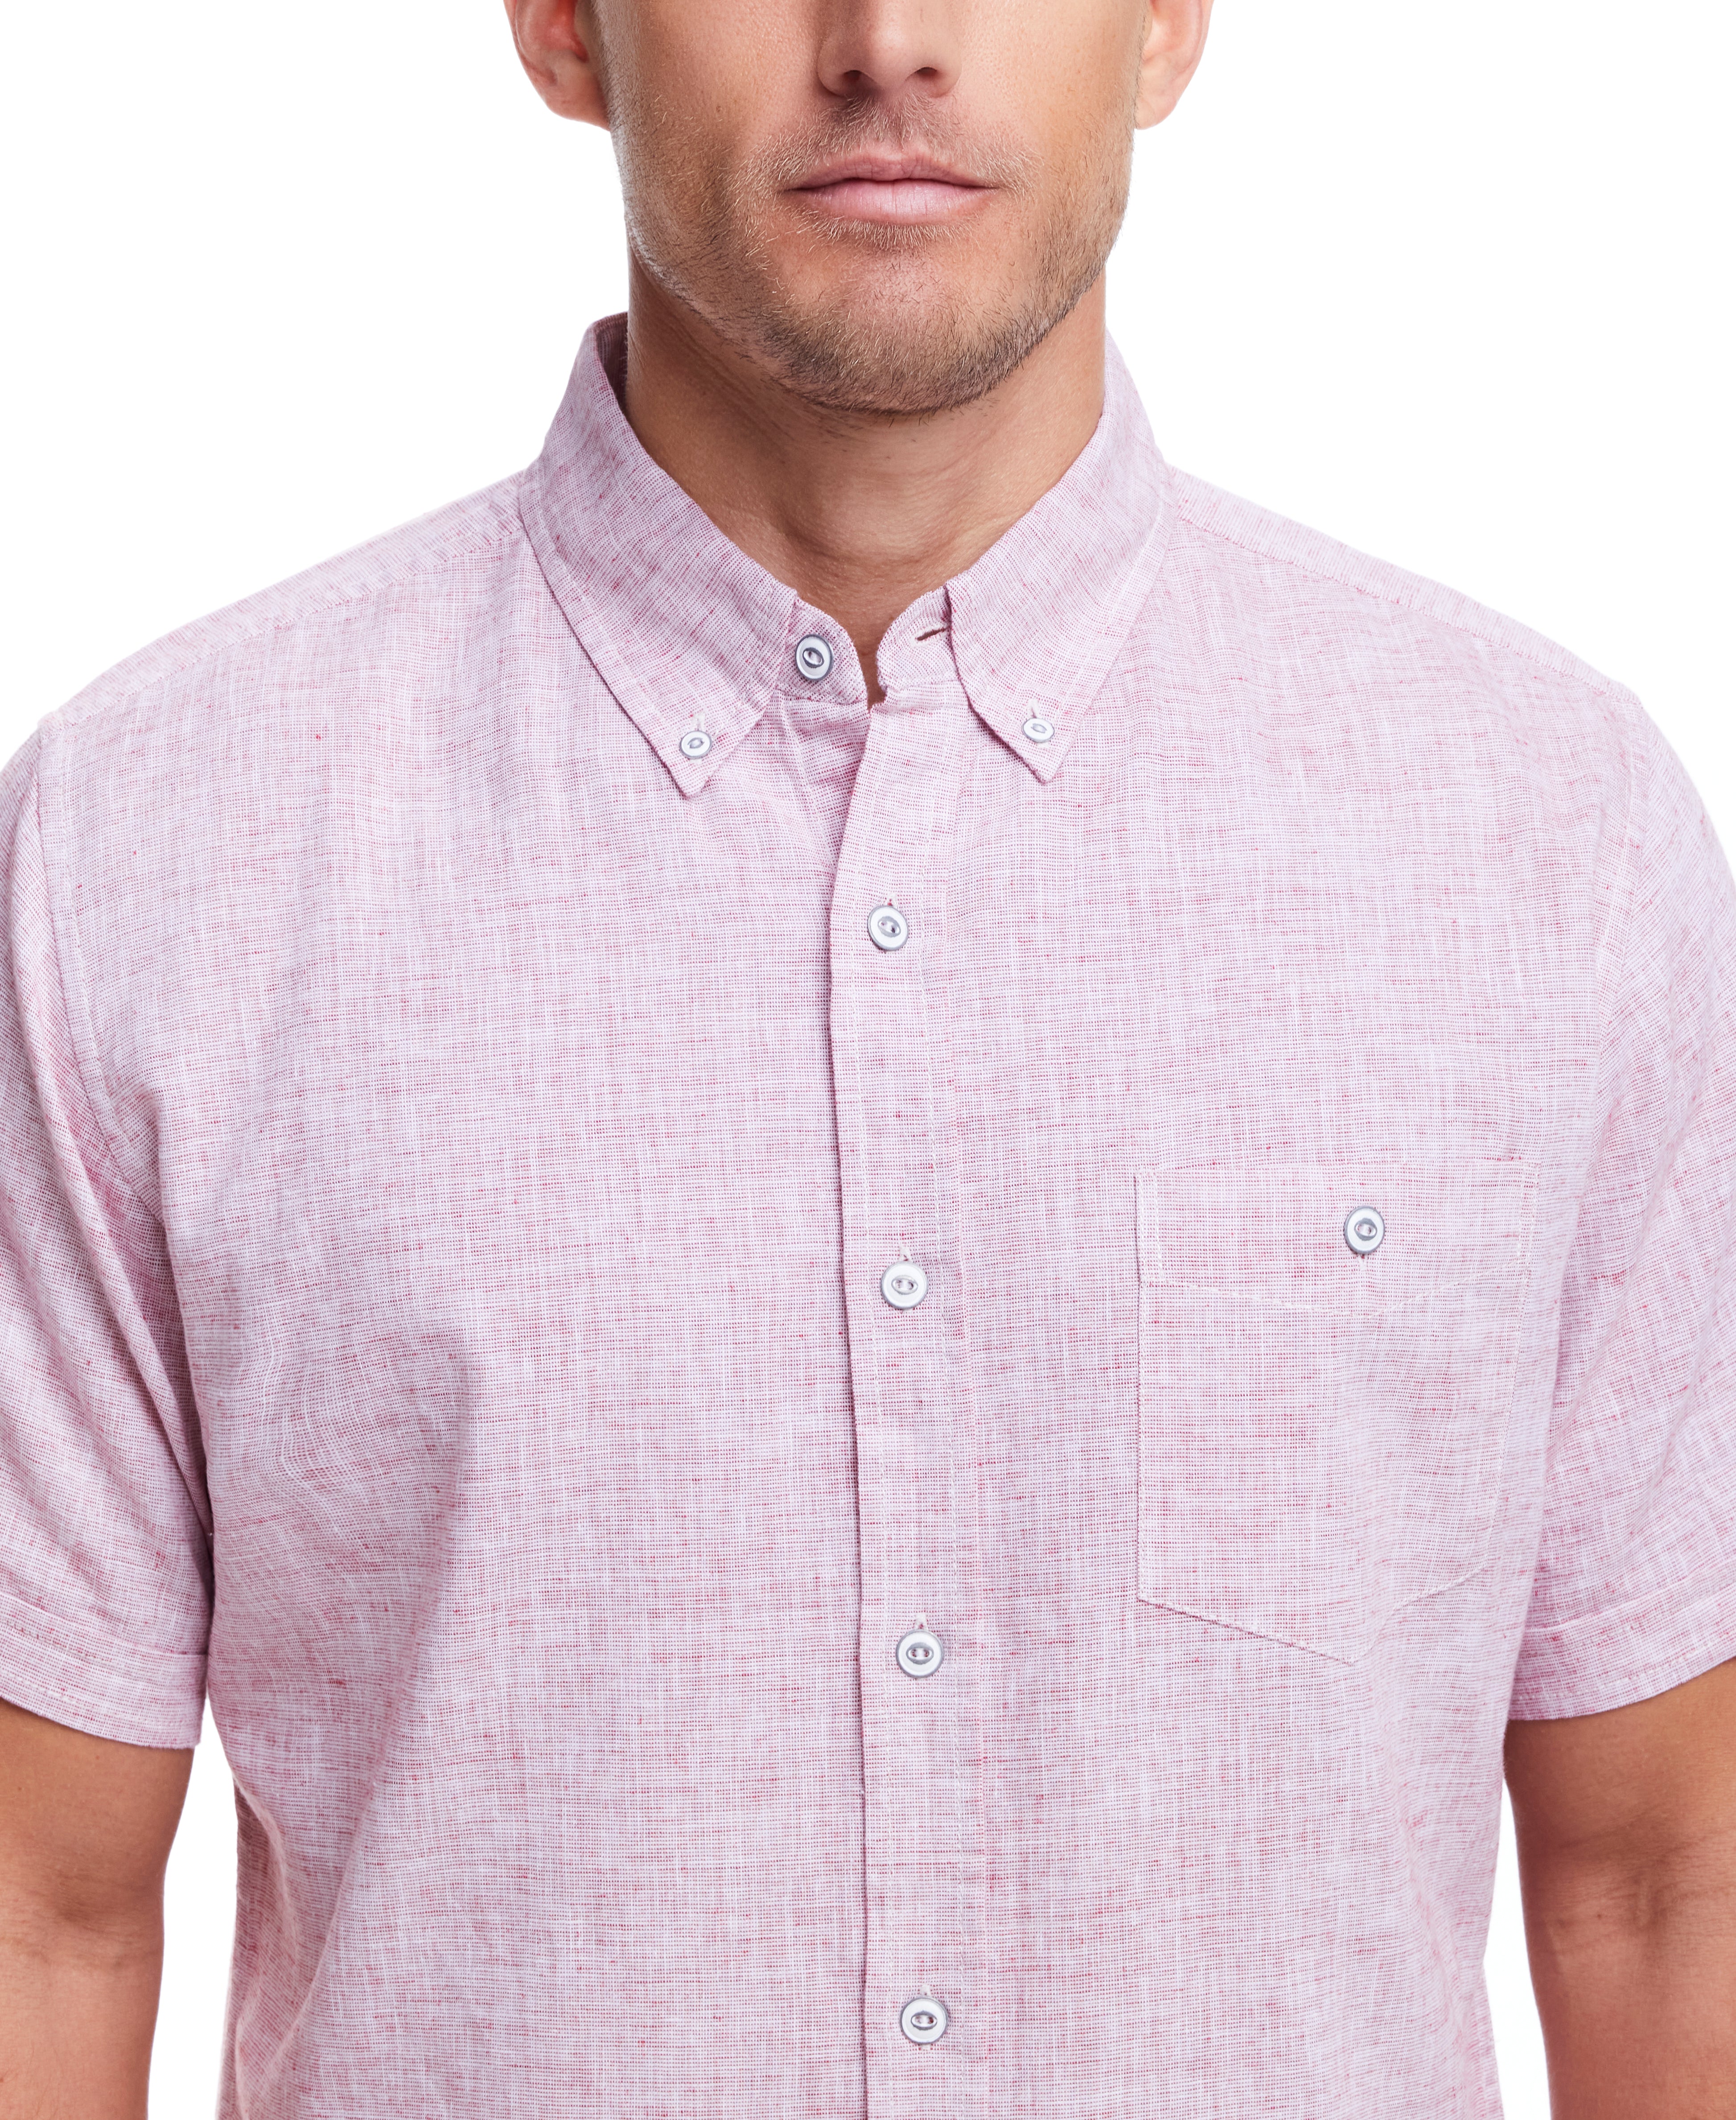 SHORT SLEEVE SOLID LINEN COTTON in CARMINE RED